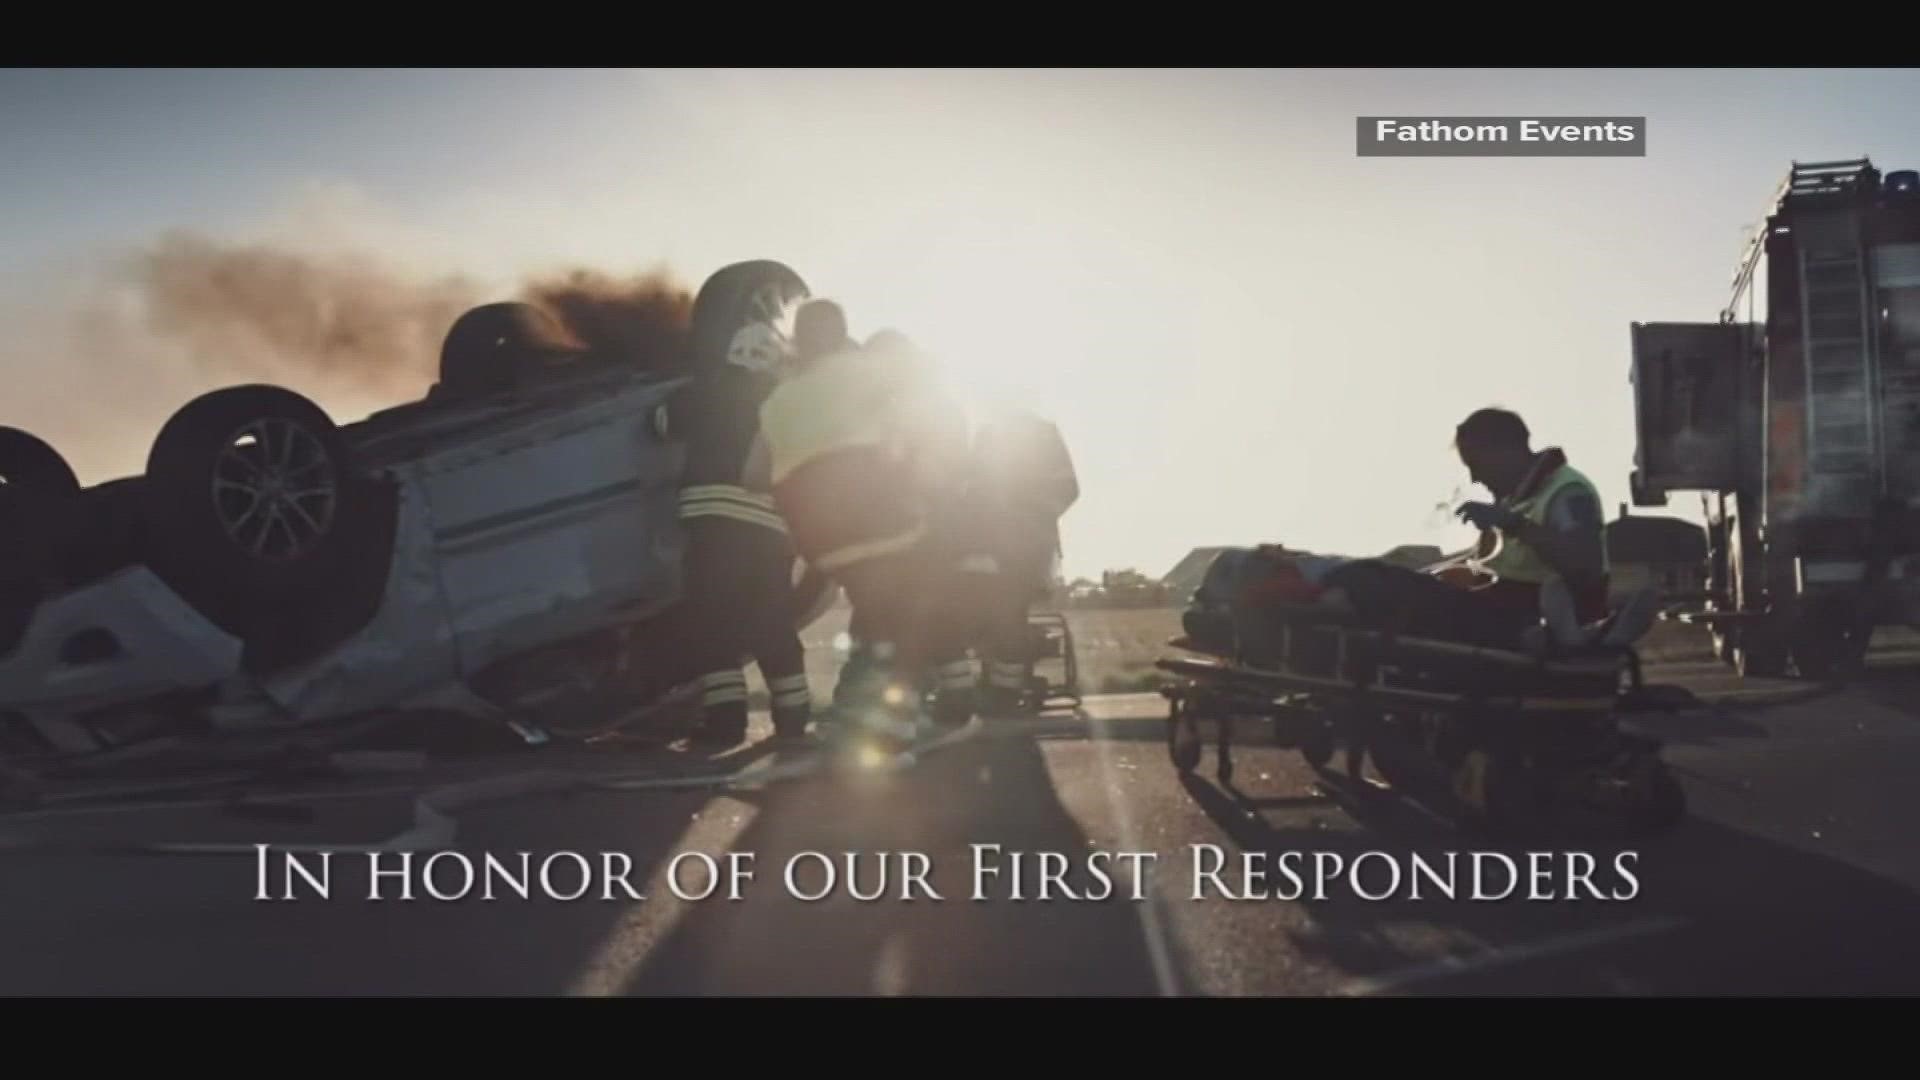 The new movie 'First Responders' goes into depth about what these first responders face daily.